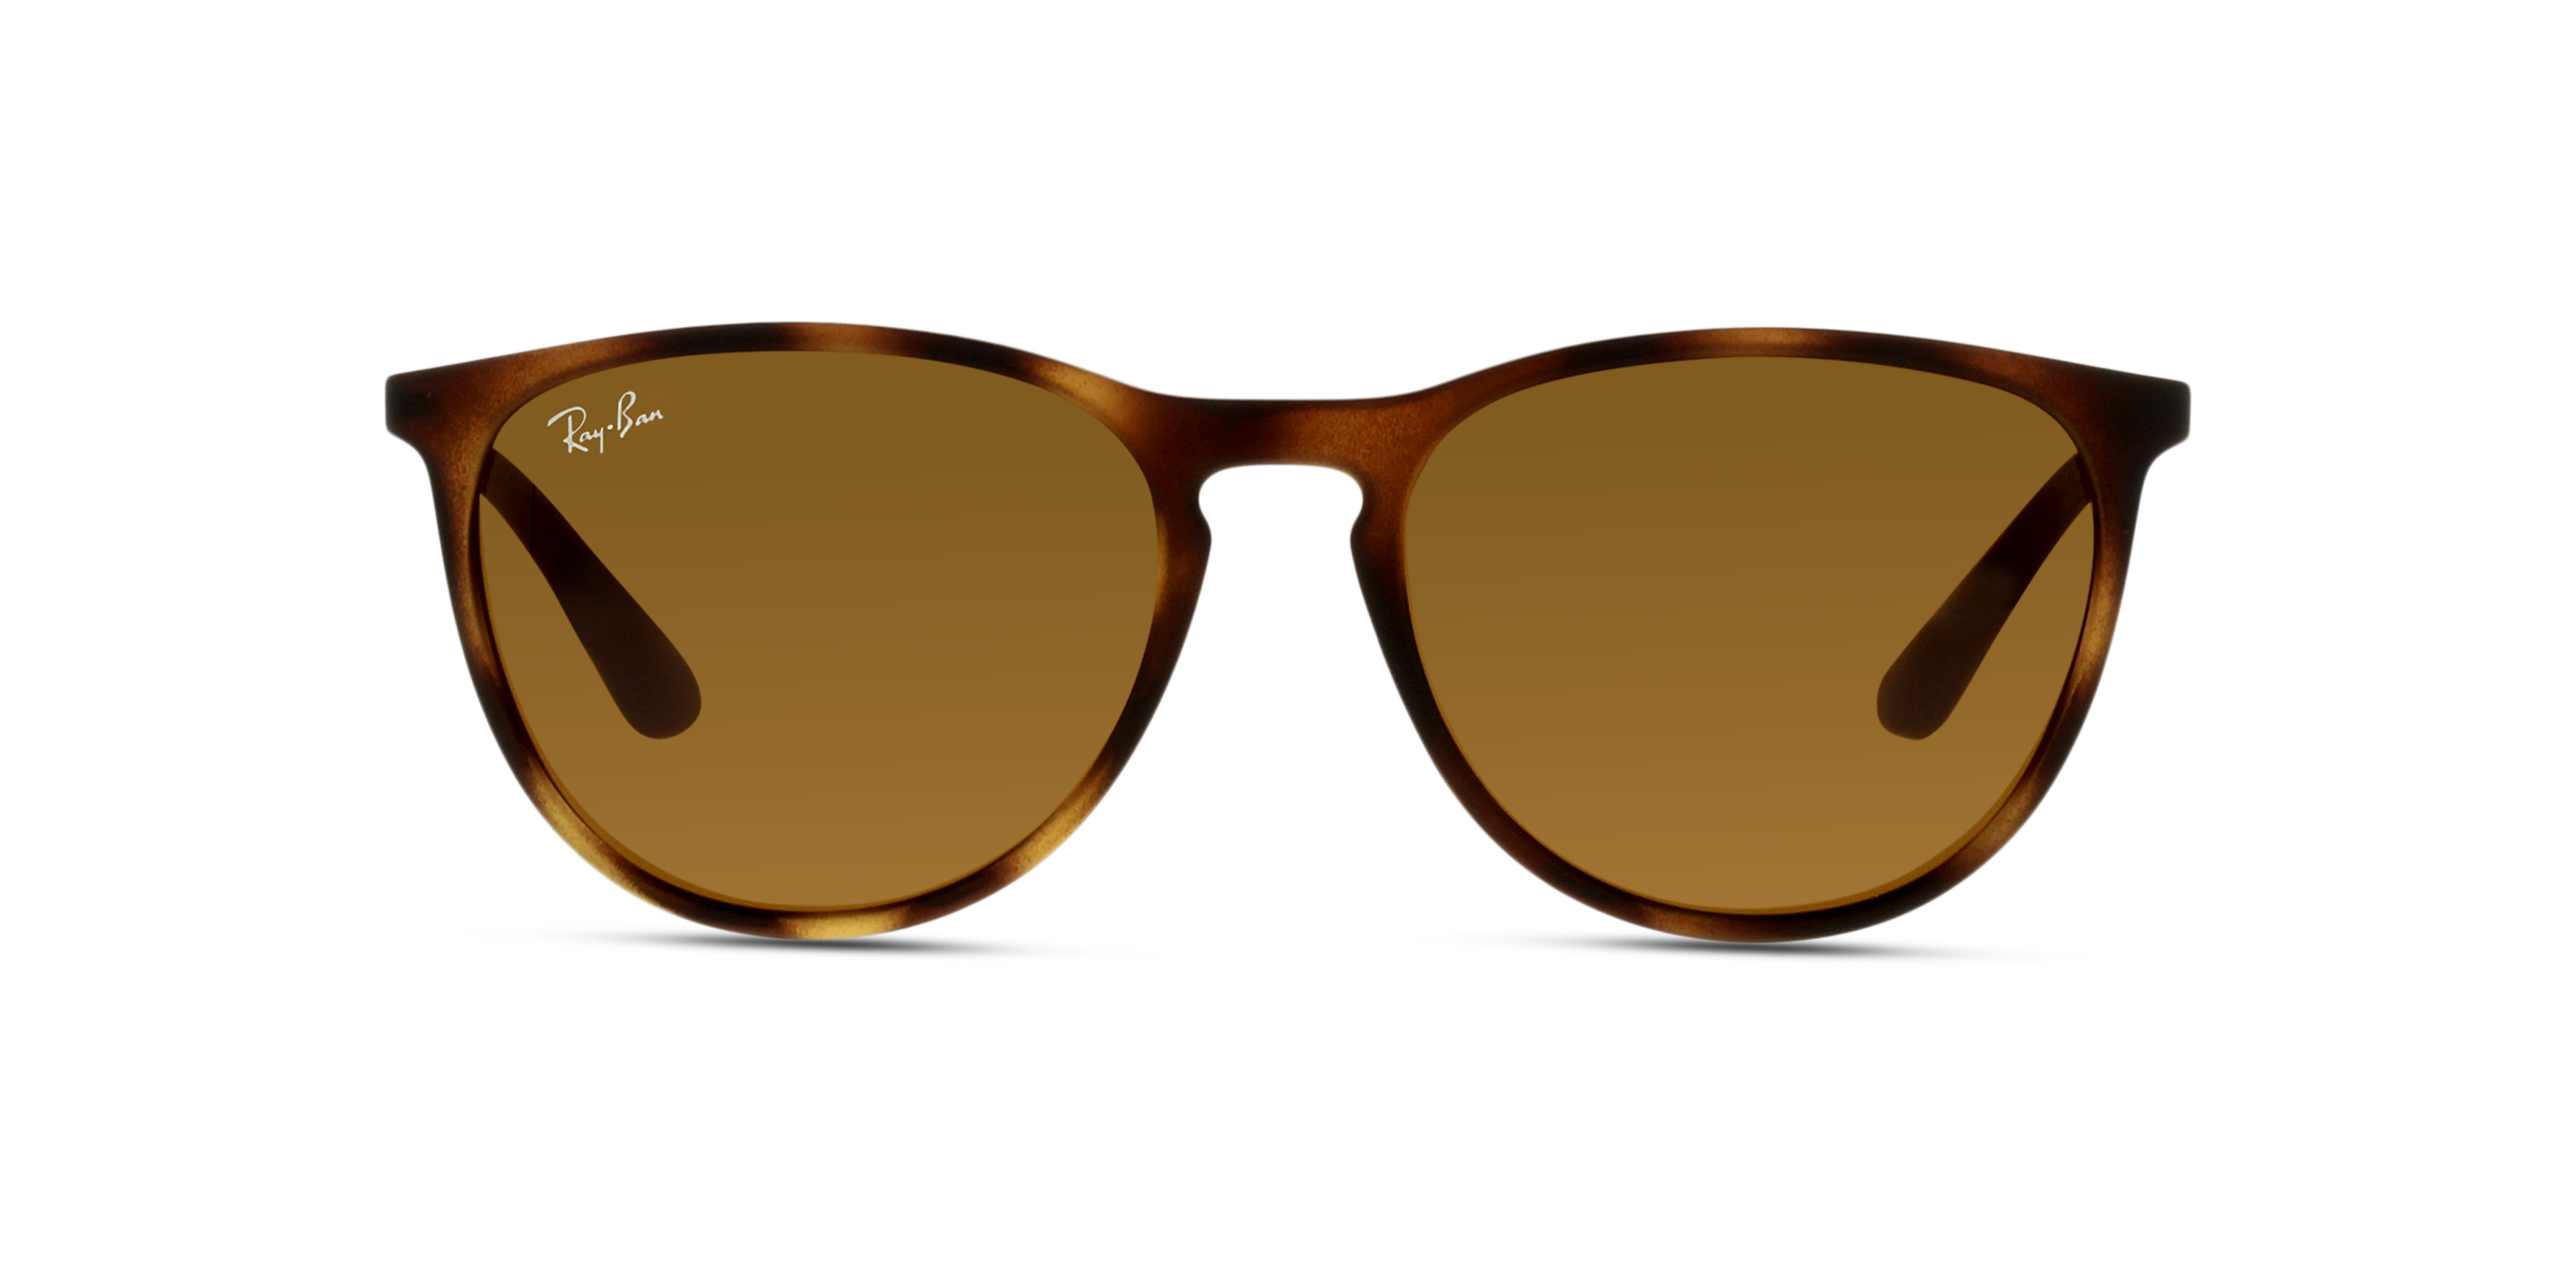 [products.image.front] Ray-Ban Kids 0RJ9060S 700673